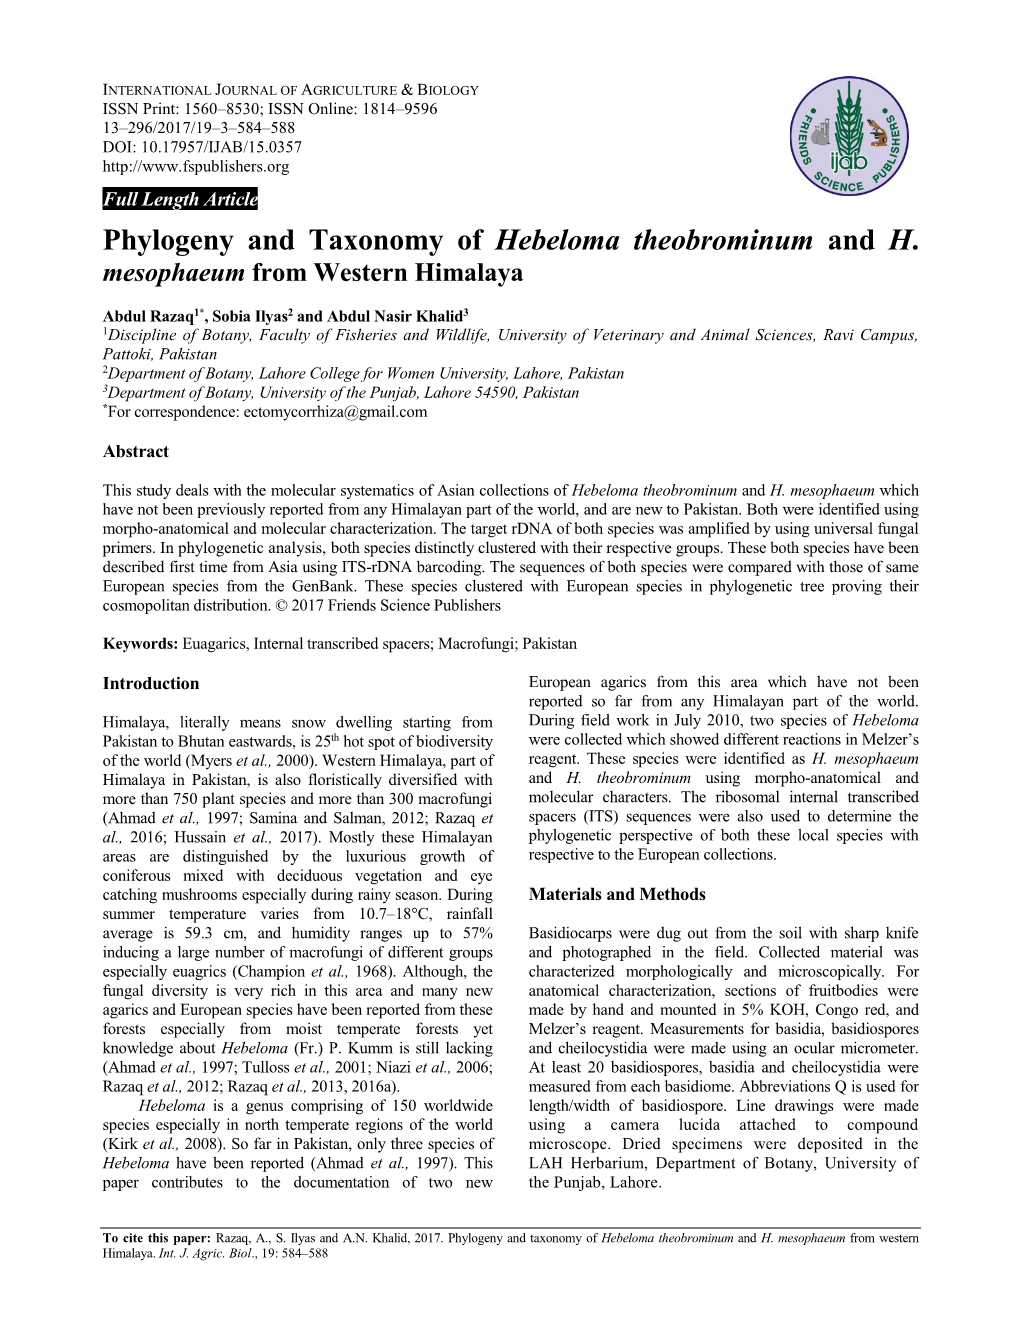 Phylogeny and Taxonomy of Hebeloma Theobrominum and H. Mesophaeum from Western Himalaya